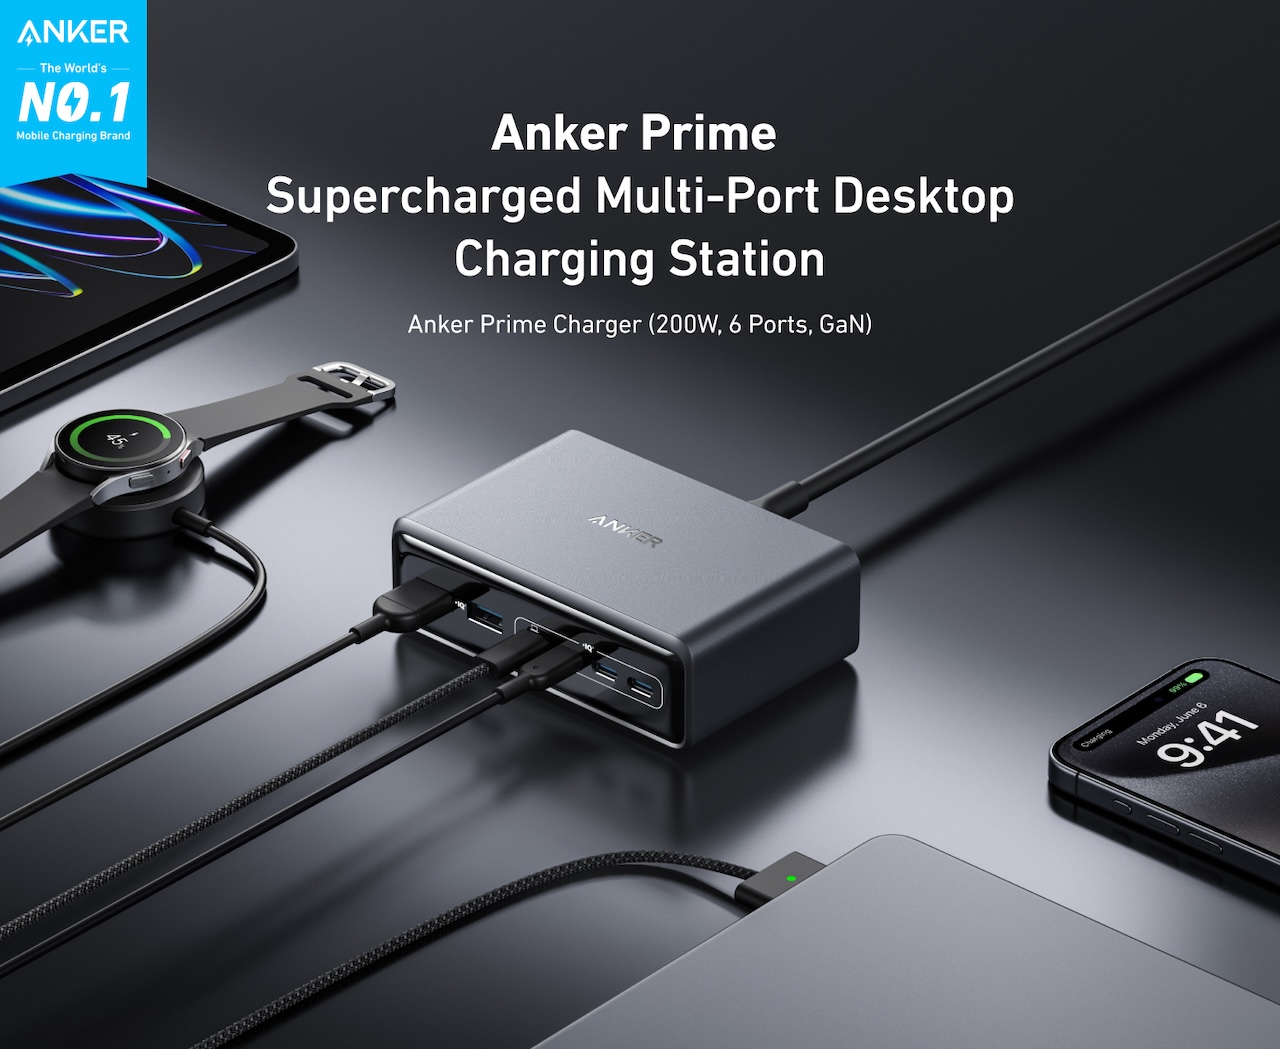 Anker Prime Charger (200W, 6 Ports, GaN)